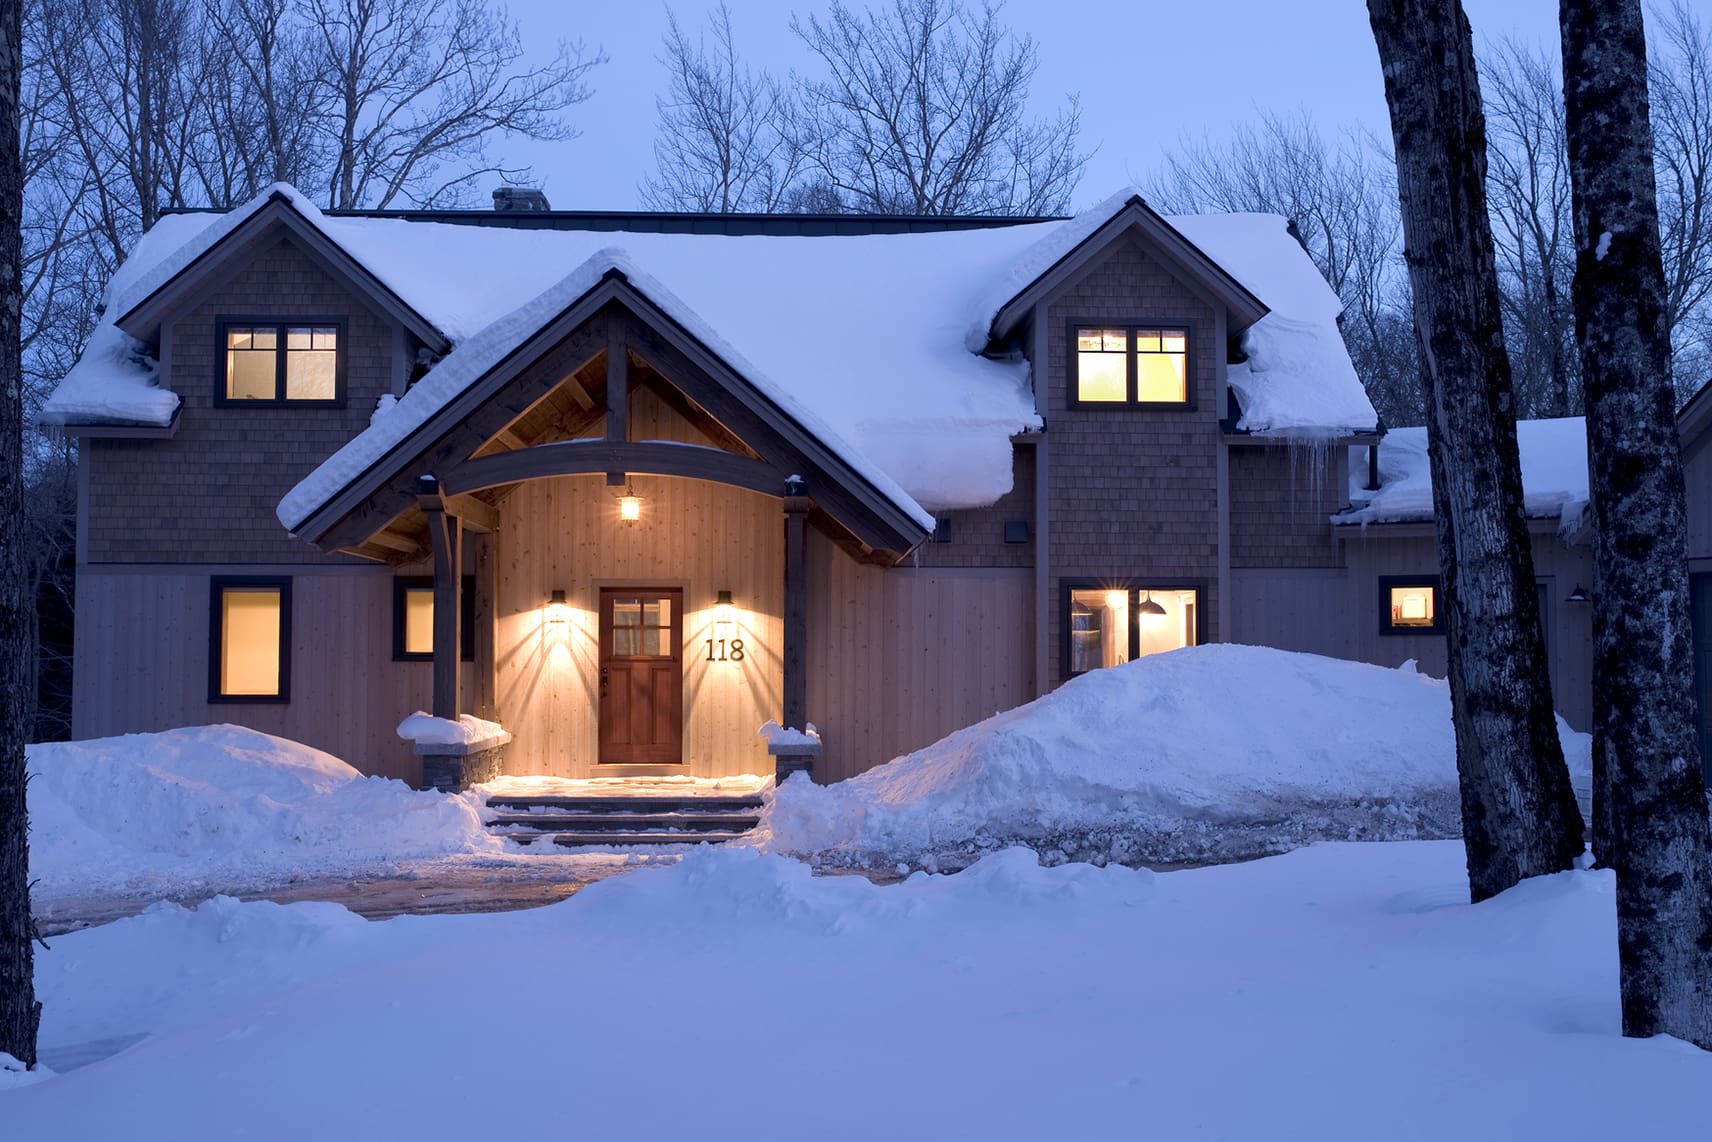 Exterior of an energy efficient home at dusk after a snow fall.